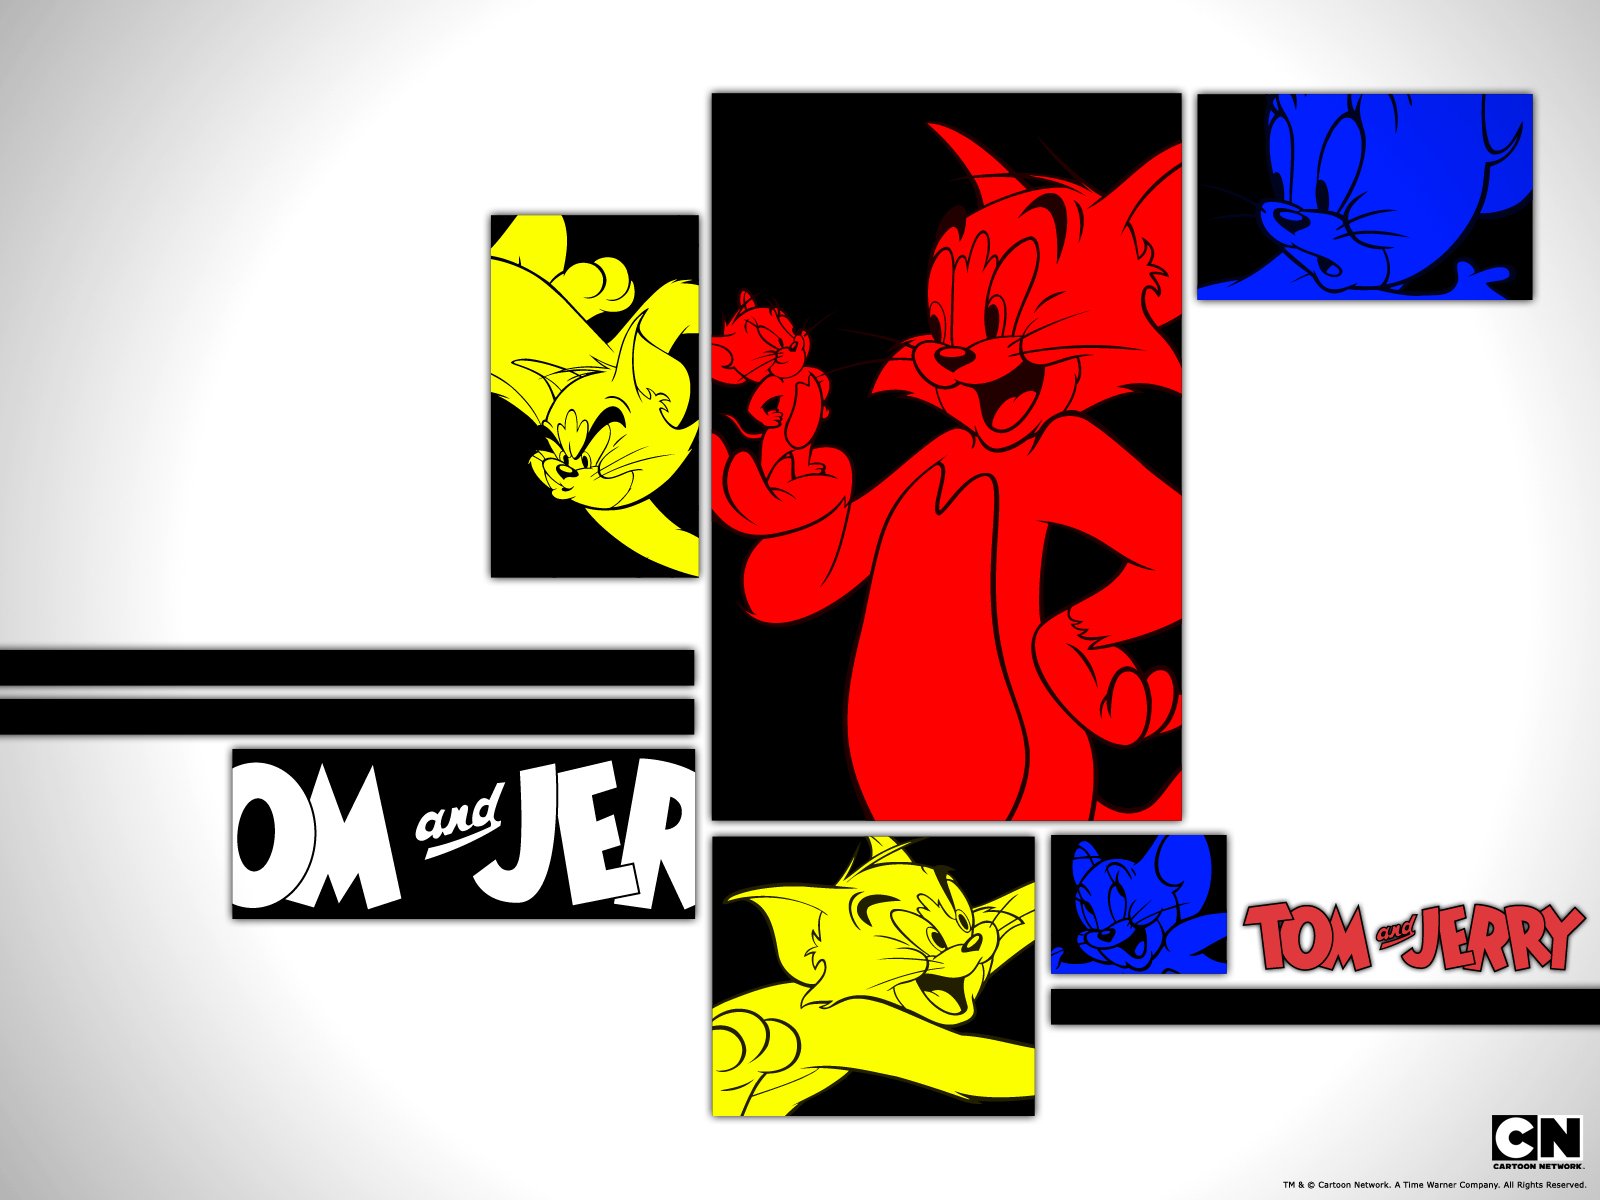 tom, Jerry, Animation, Cartoon, Comedy, Family, Cat, Mouse, Mice, 1tomjerry Wallpaper